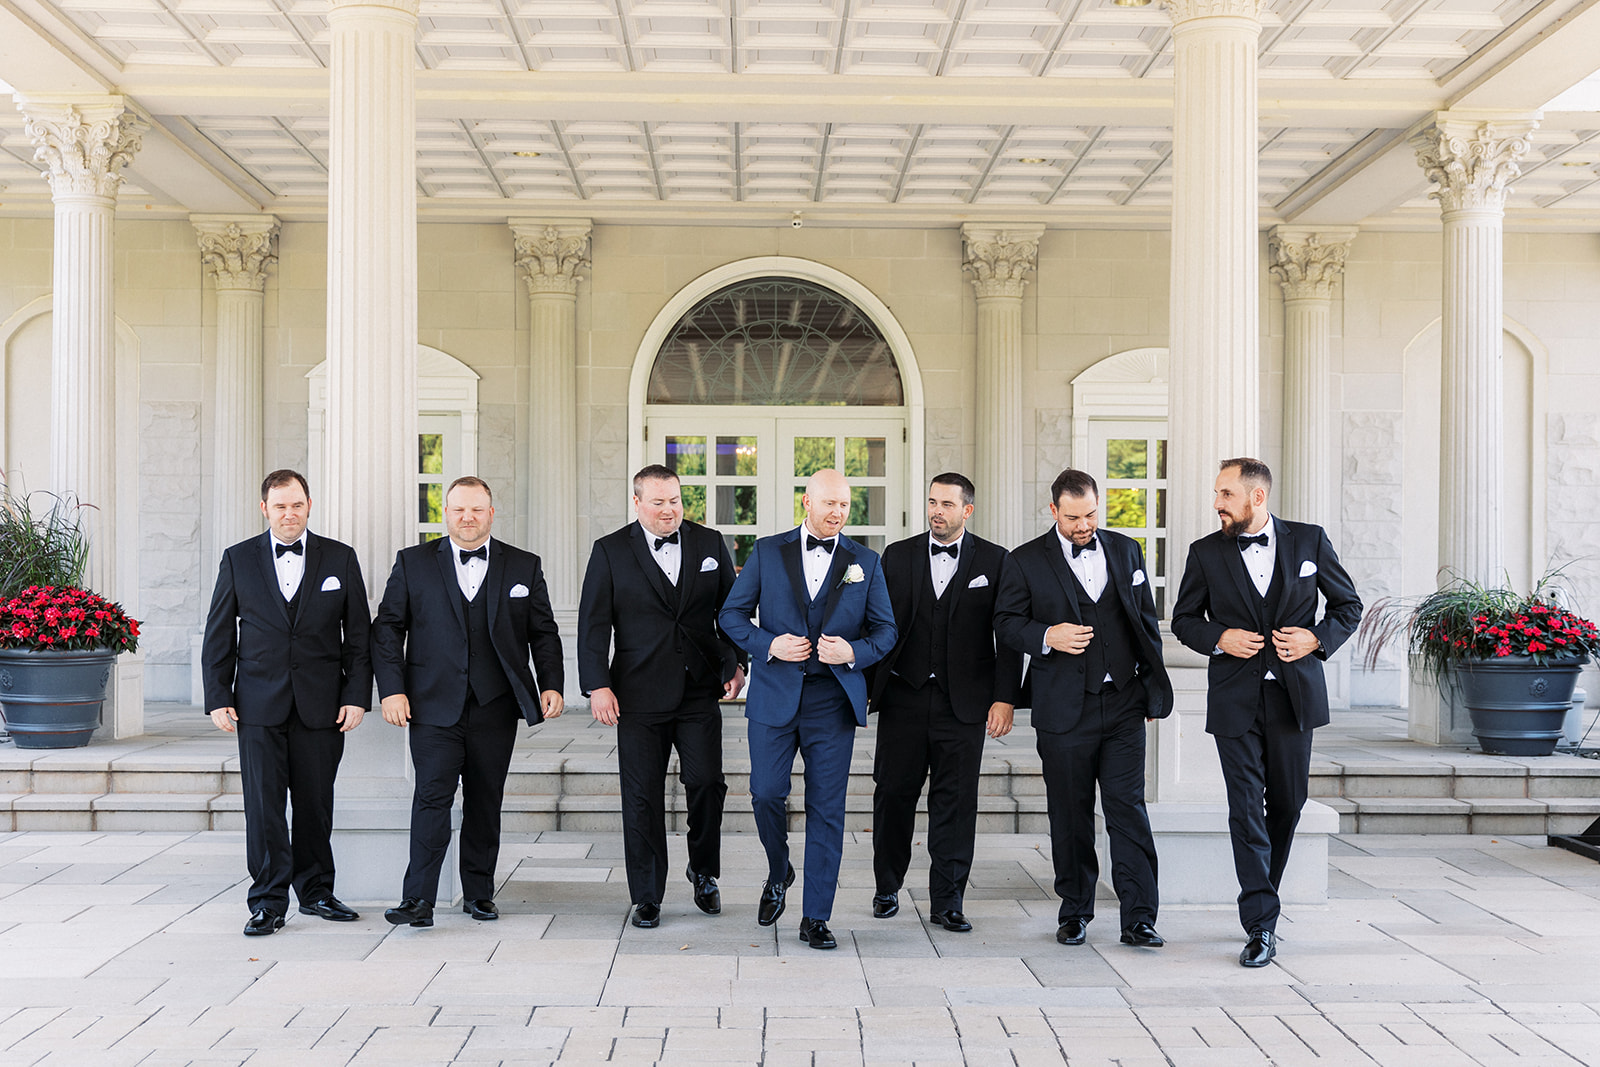 A groom walks with his 6 groomsmen through an ornate car port at his The Palace At Somerset Wedding